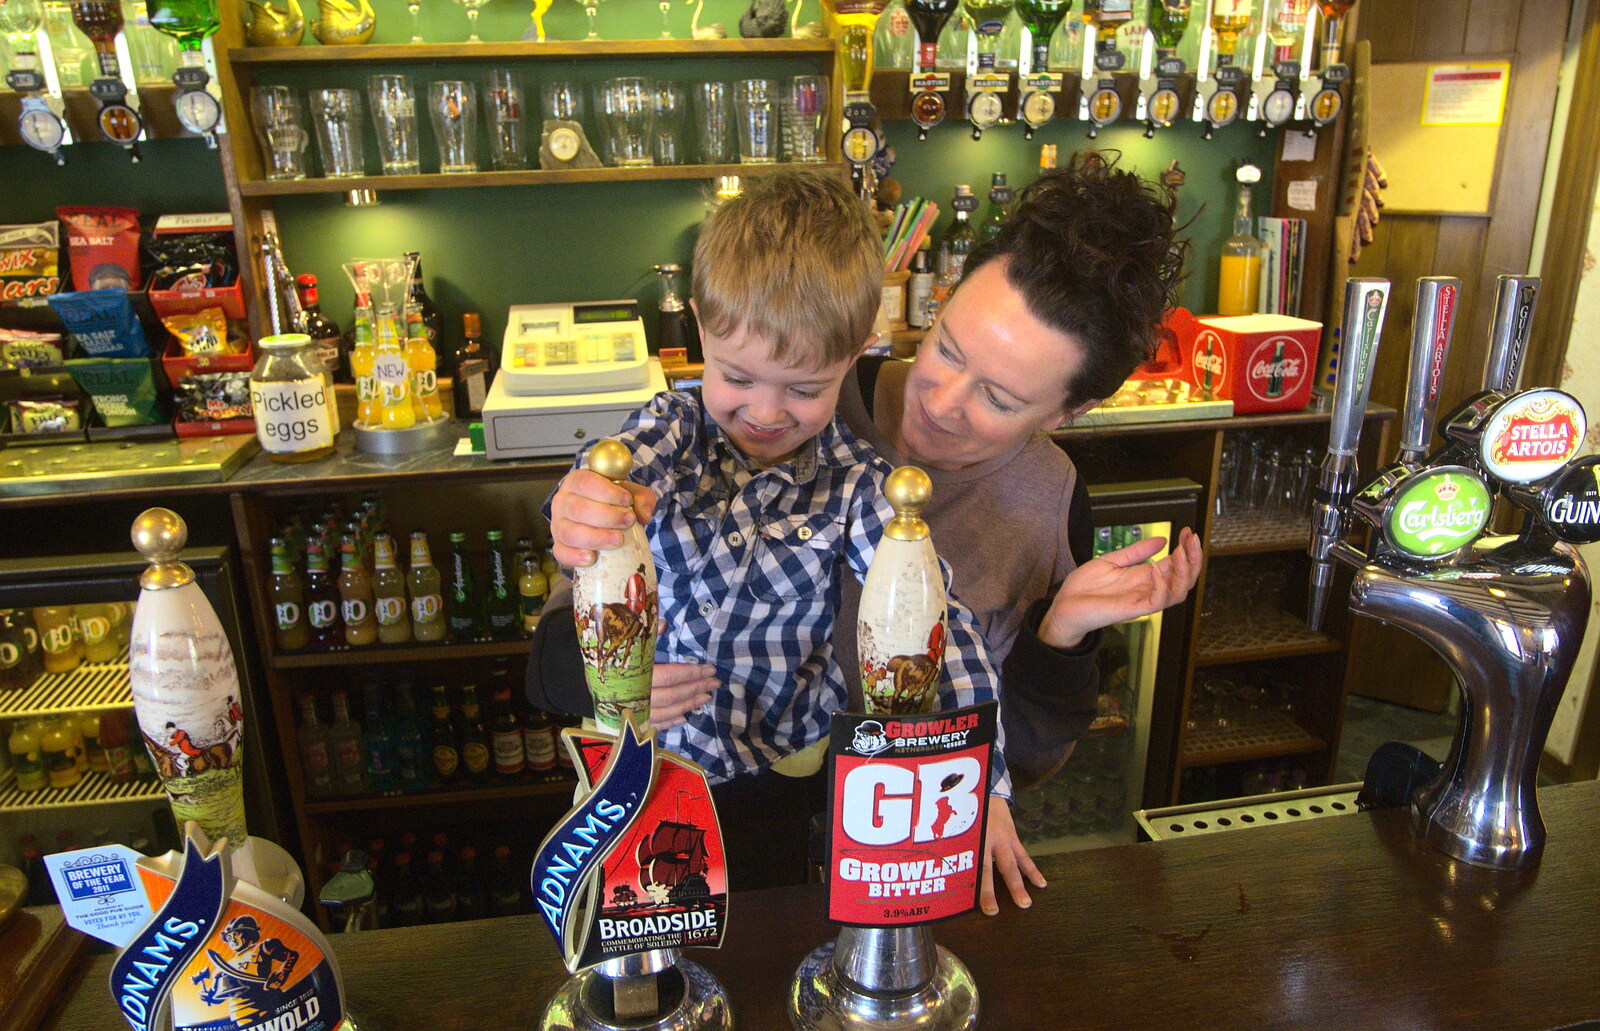 Evelyn helps Fred pull a pint from An Easter Visit from Da Gorls, Brome, Suffolk - 2nd April 2013